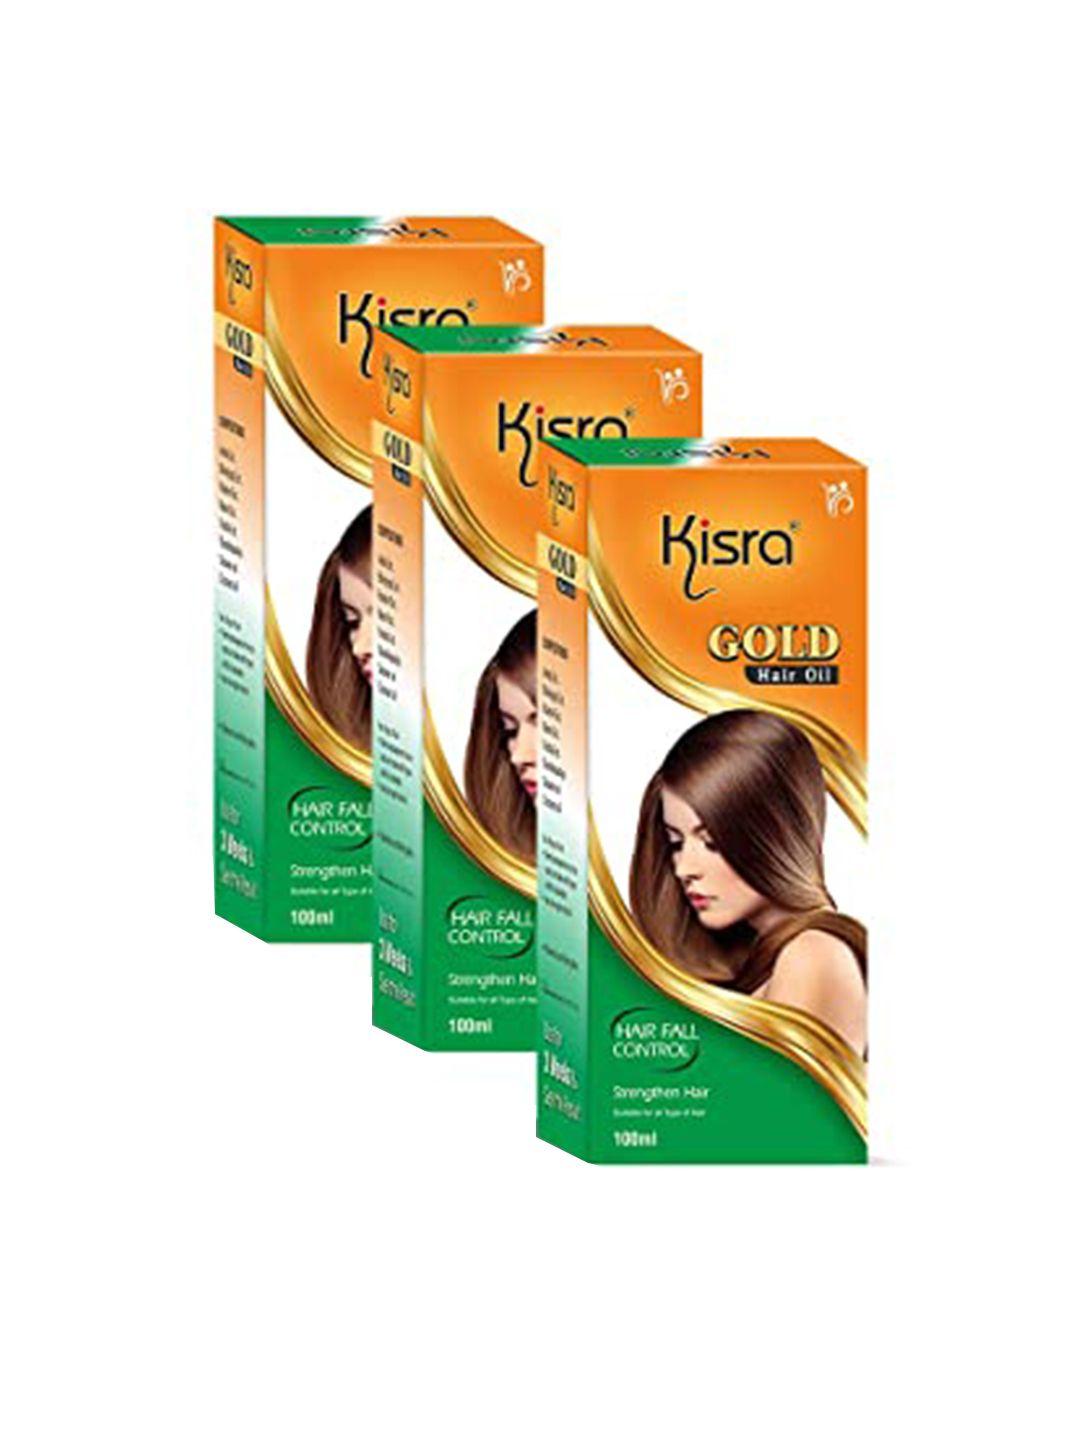 kisra gold set of 3 hair oils for frizz control & hair smoothening 100ml each